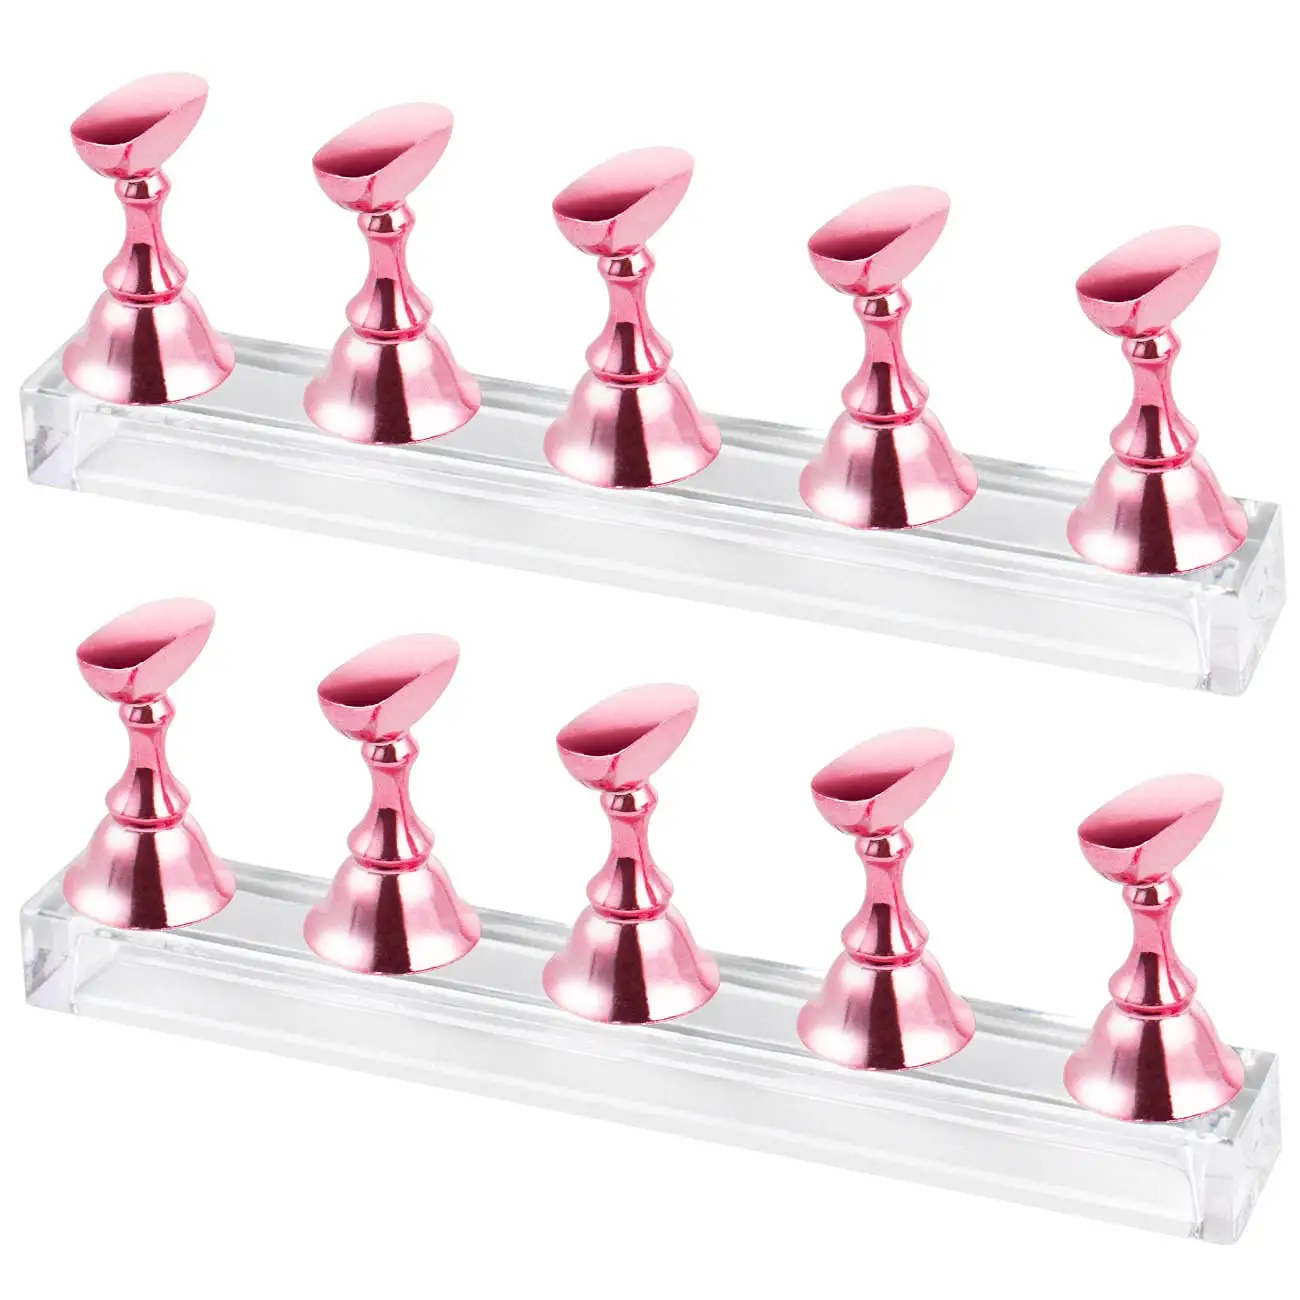 Reusable Acrylic Nail Practice Stand Magnetic Nail Tips Practice Holder DIY Nail Training Display Stands